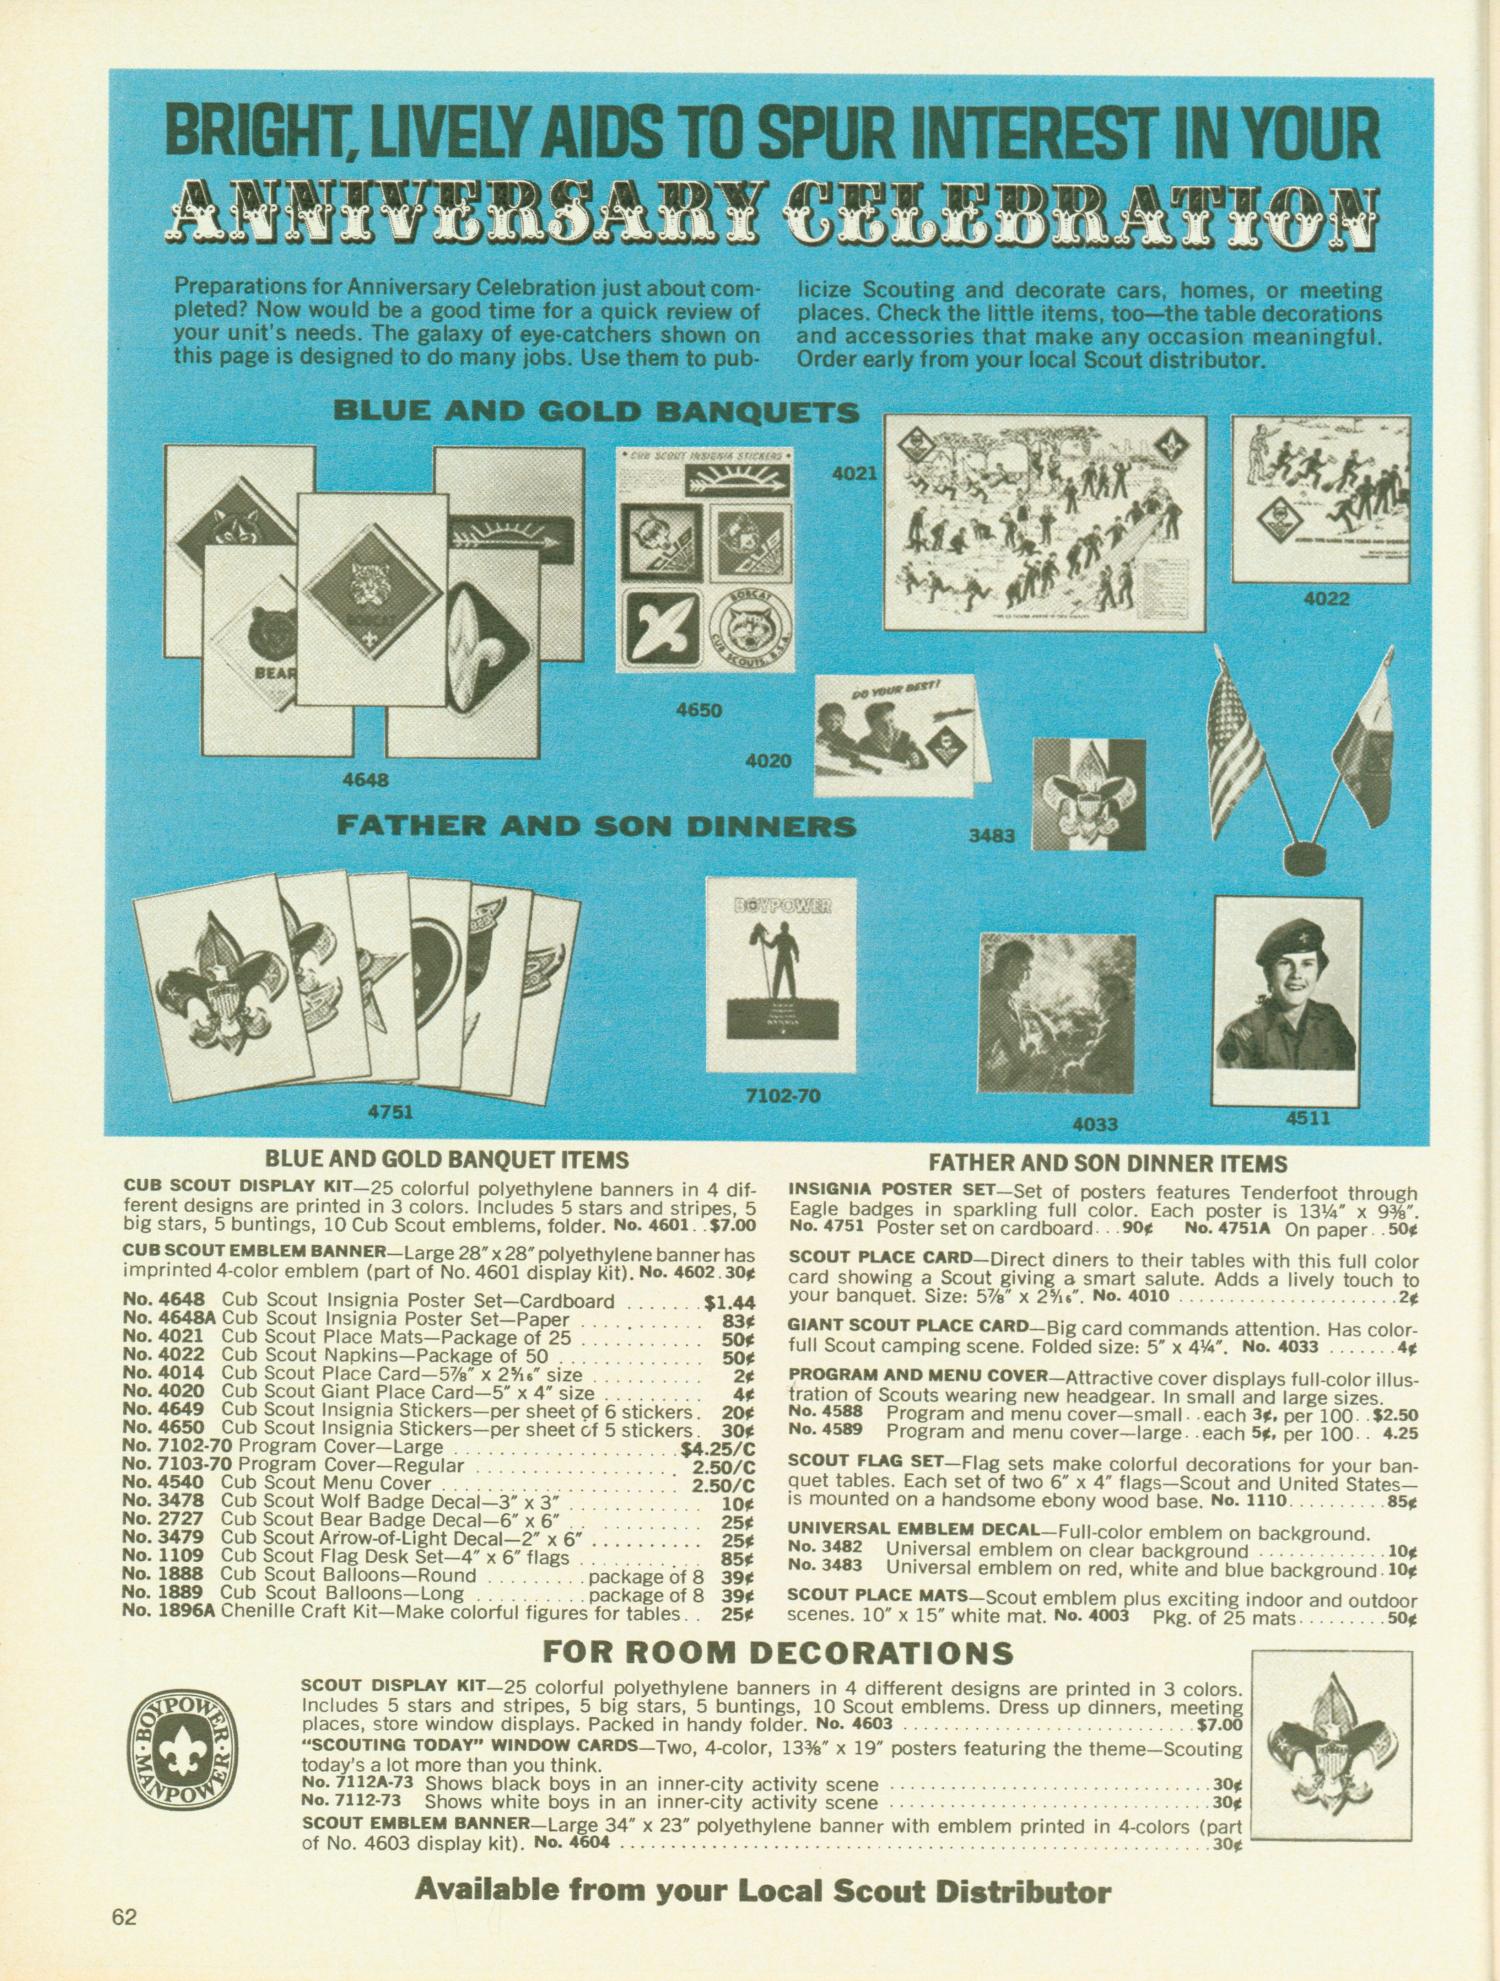 Scouting, Volume 61, Number 1, January-February 1973
                                                
                                                    62
                                                